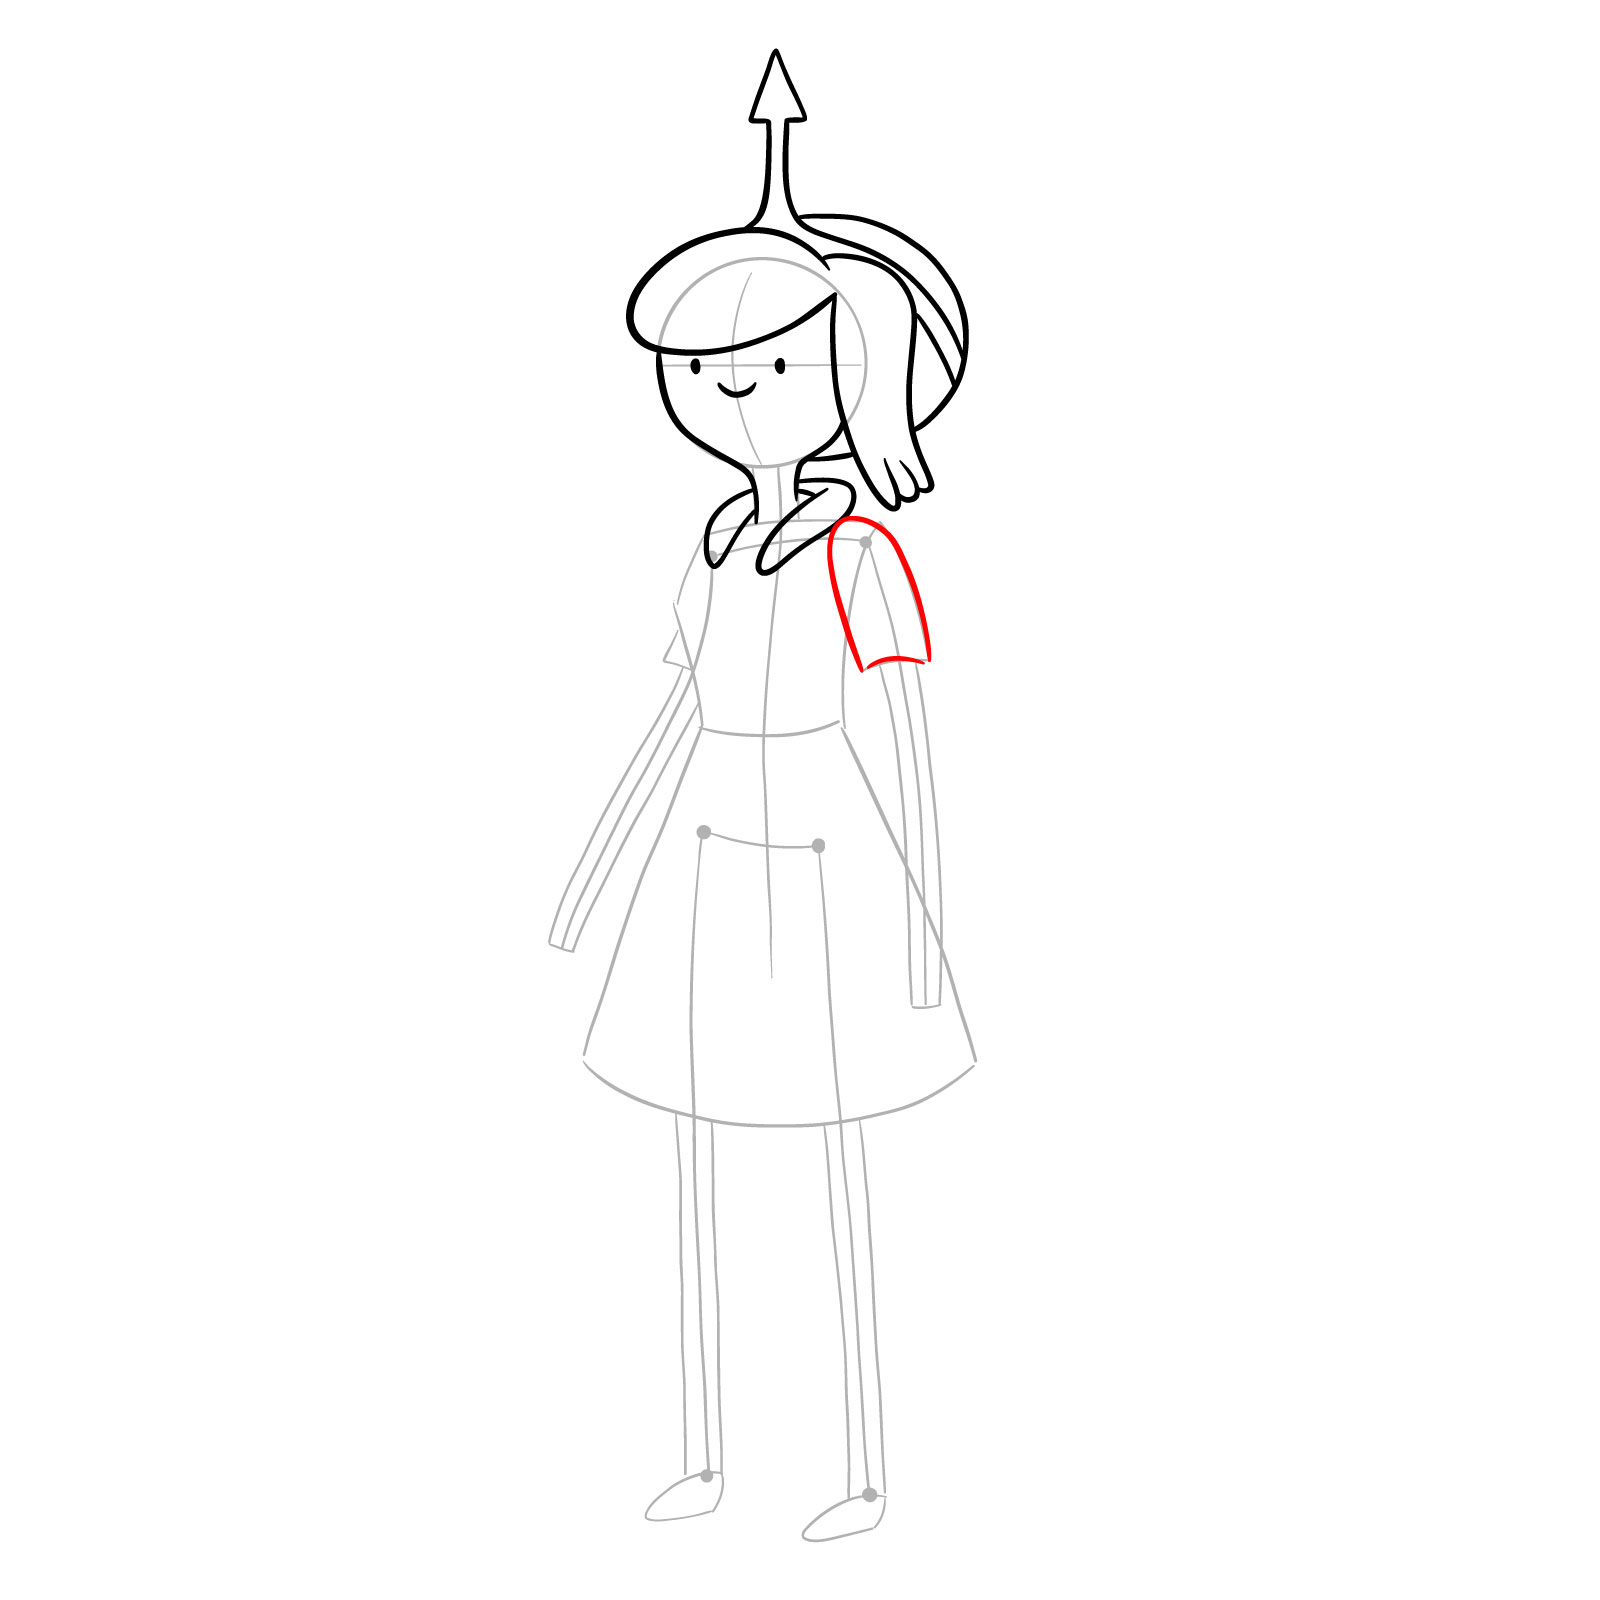 How to draw Princess Chewypaste from Adventure Time - step 11